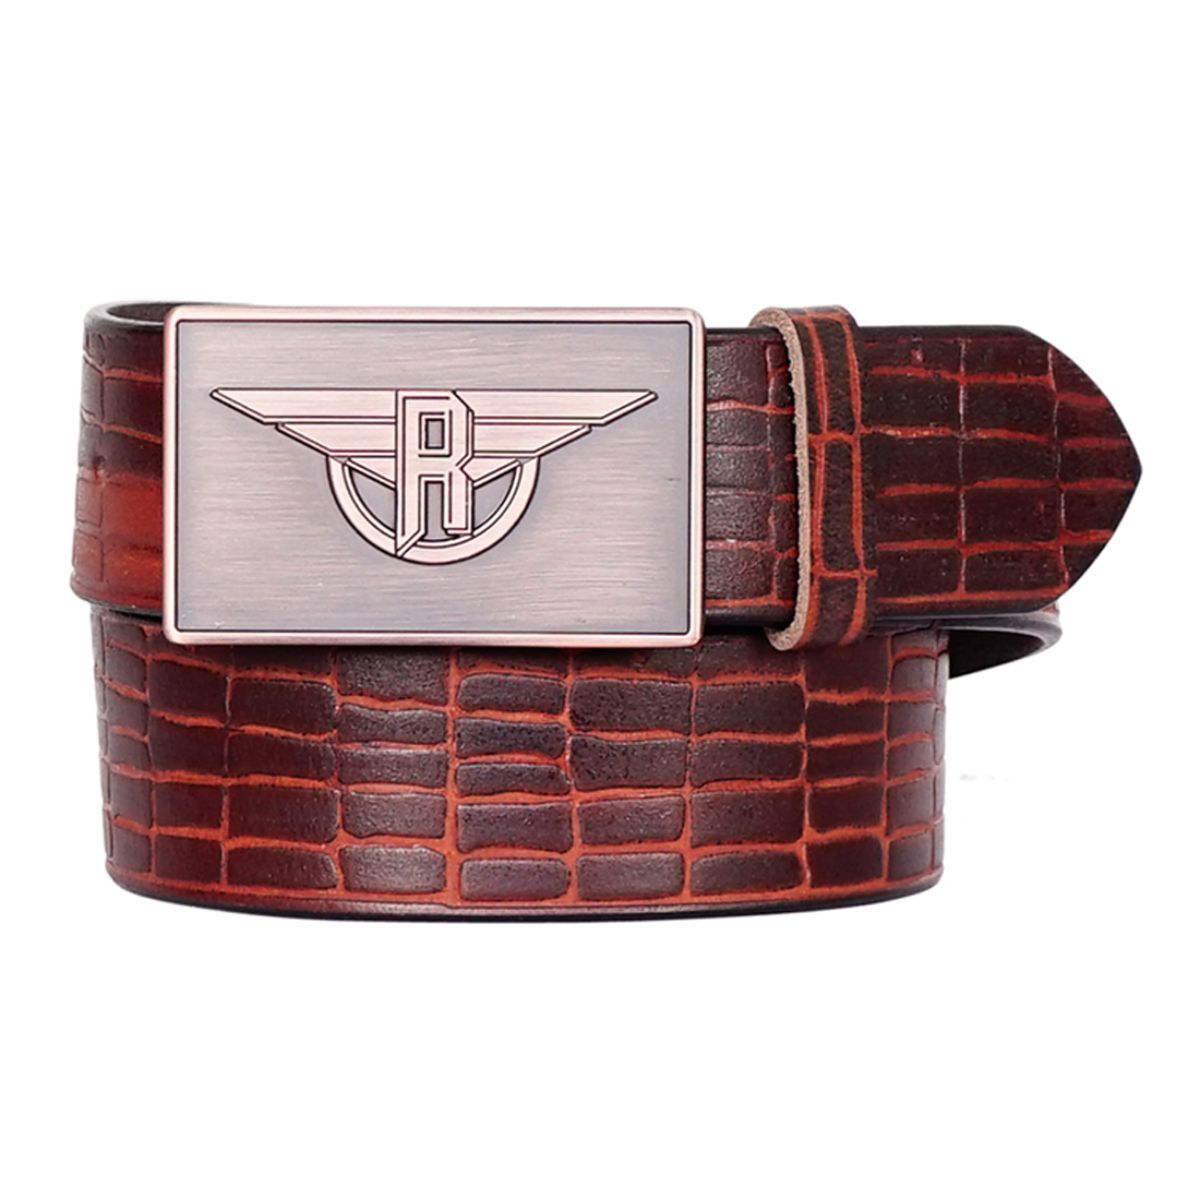 Justanned Roadies By Men'S Genuine Leather Belt On Oxidized Copper Tone Buckle (30)